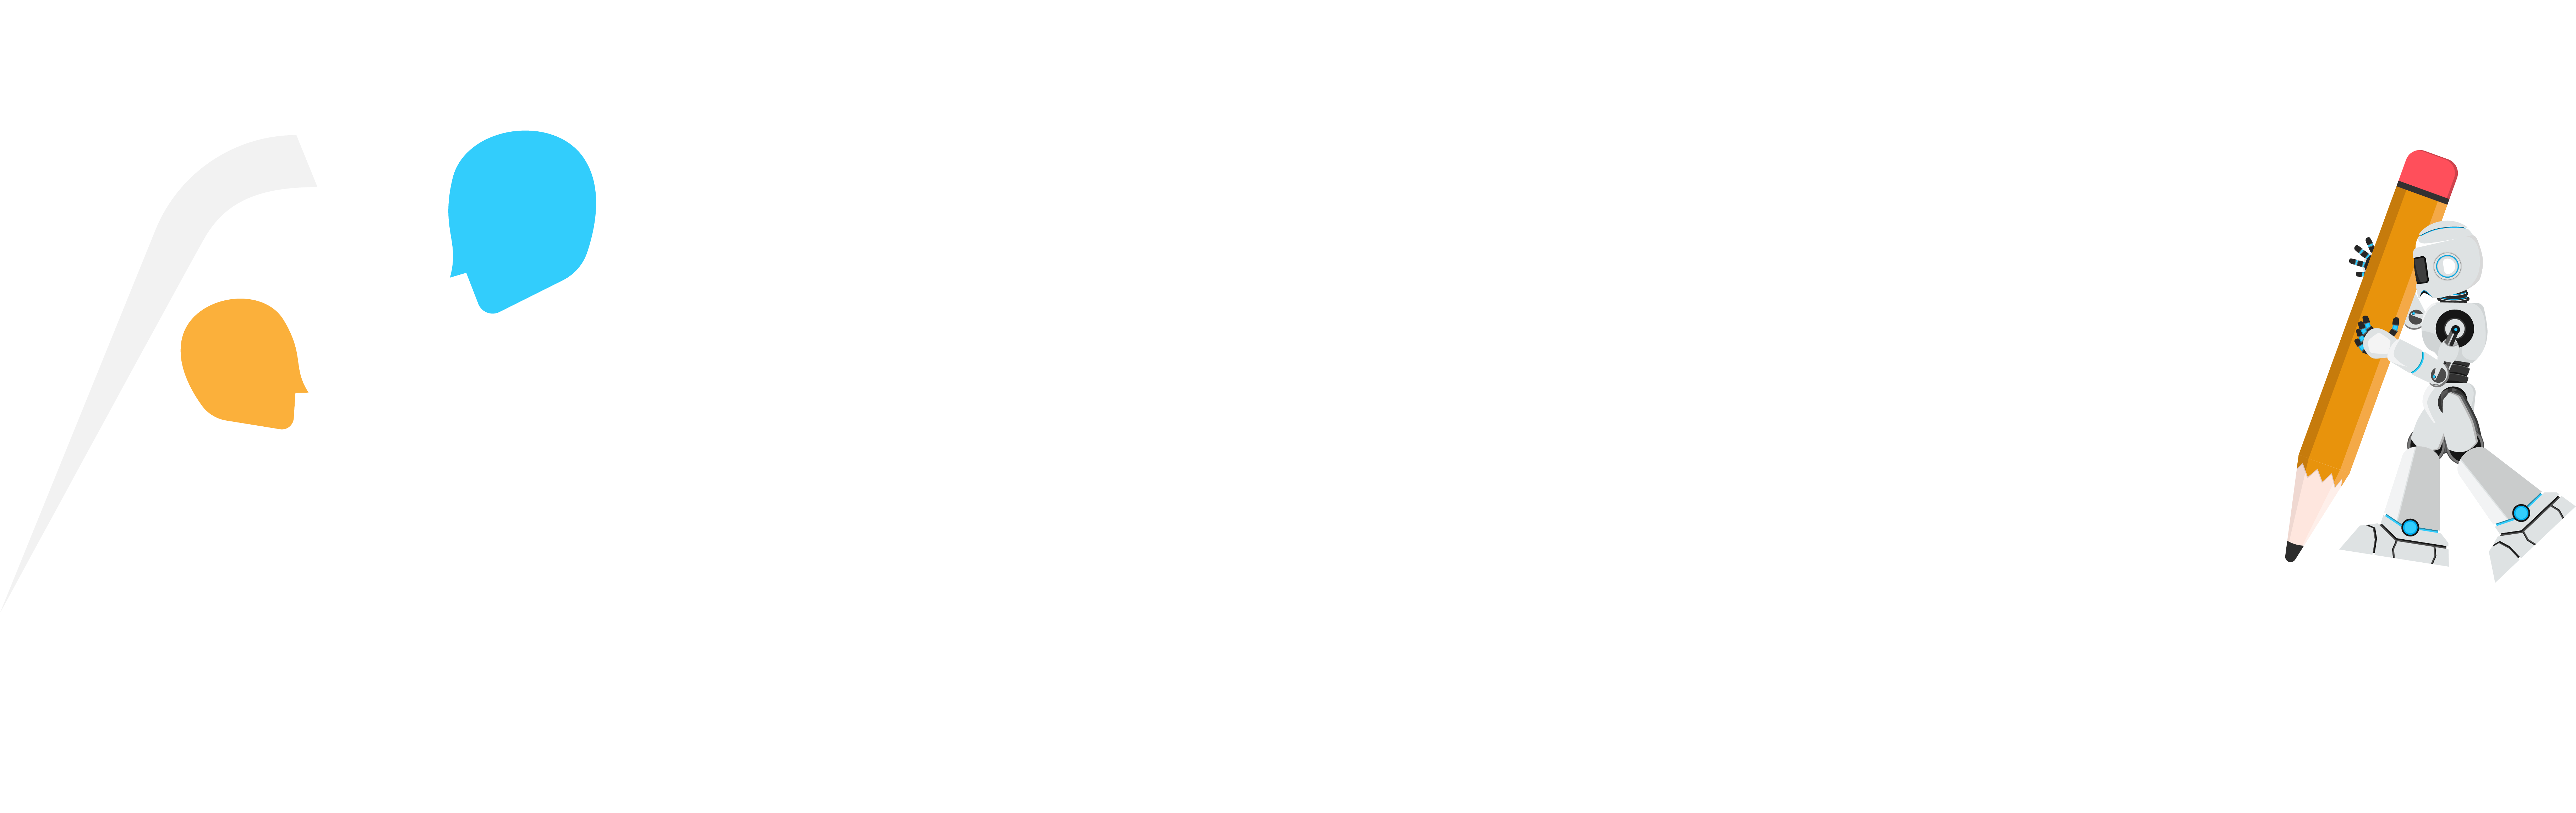 Ai Cartoonz - Worlds First AI-Infused Animation App